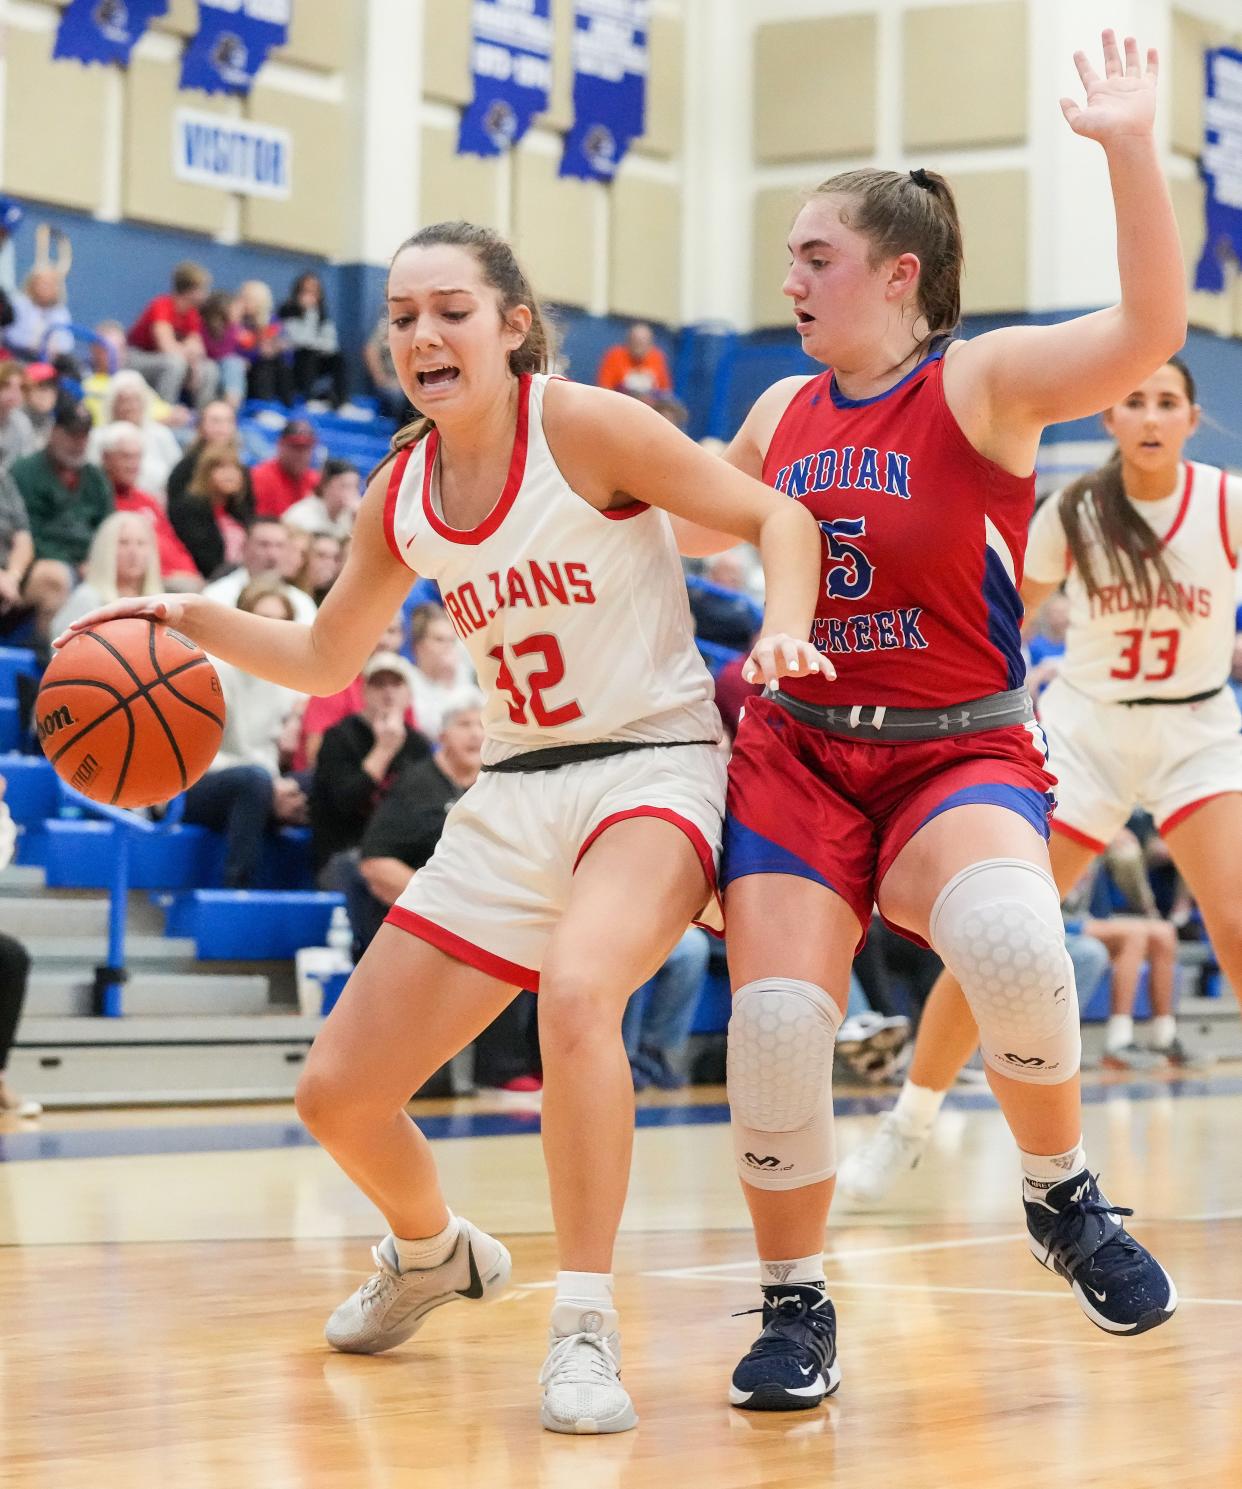 Center Grove Trojans Lilly Bischoff (32) rushes up the court against Indian Creek Lauren Foster (5) on Thursday, Nov. 16, 2023, during the semifinals of the Johnson County Tournament at Franklin Community High School in Franklin. The Center Grove Trojans defeated Indian Creek, 61-52.